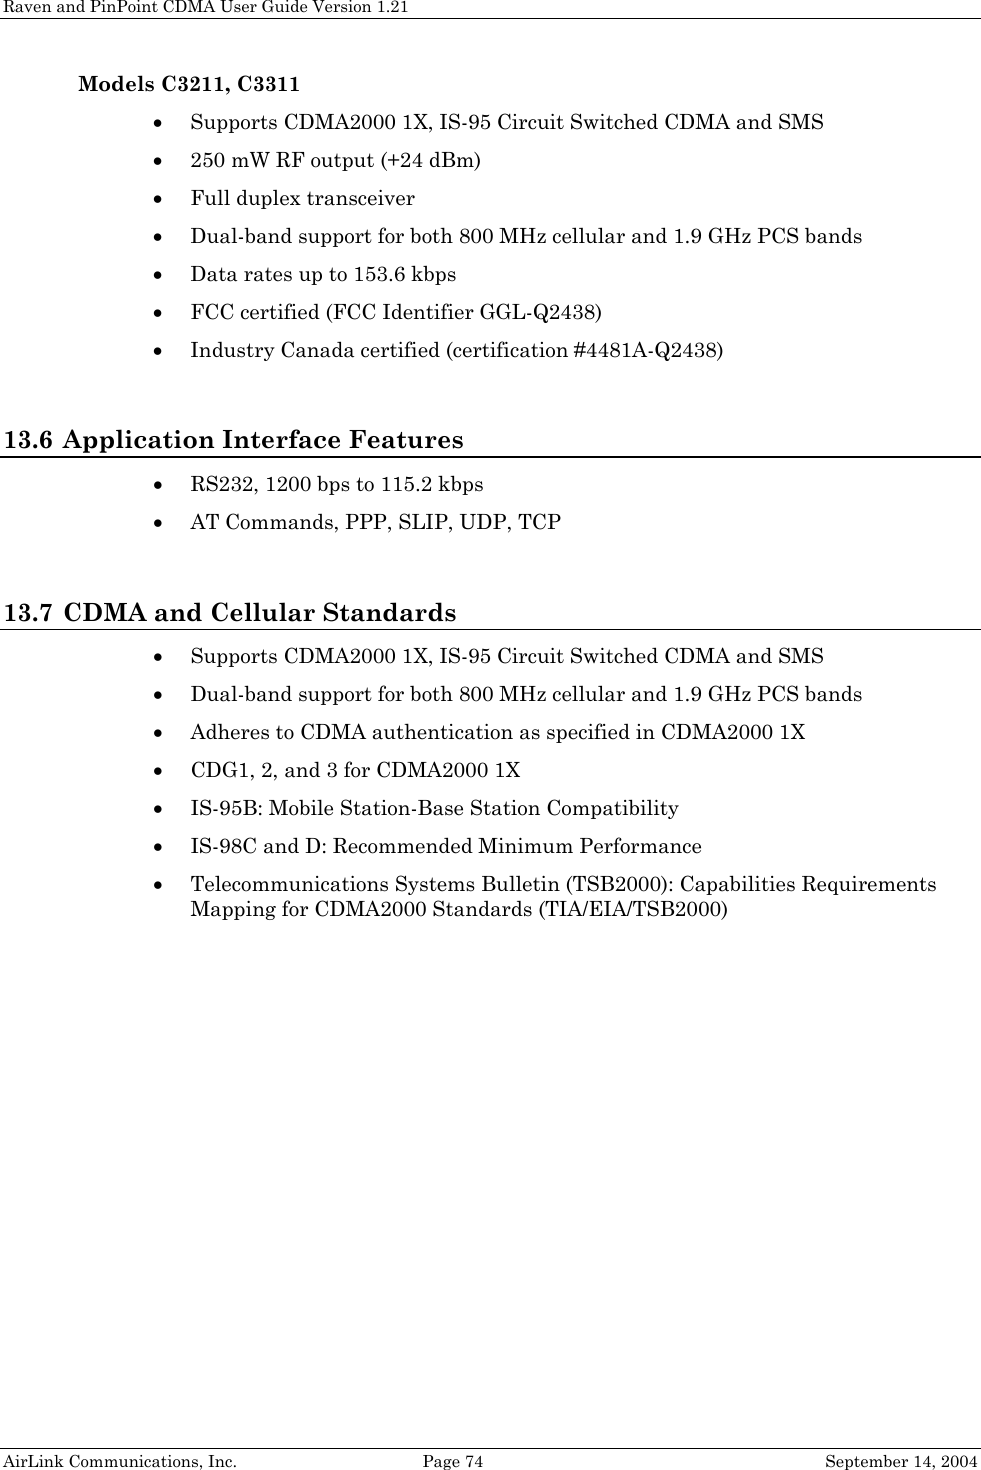 Raven and PinPoint CDMA User Guide Version 1.21 AirLink Communications, Inc.  Page 74  September 14, 2004 Models C3211, C3311 • Supports CDMA2000 1X, IS-95 Circuit Switched CDMA and SMS • 250 mW RF output (+24 dBm) • Full duplex transceiver • Dual-band support for both 800 MHz cellular and 1.9 GHz PCS bands • Data rates up to 153.6 kbps • FCC certified (FCC Identifier GGL-Q2438) • Industry Canada certified (certification #4481A-Q2438)  13.6 Application Interface Features • RS232, 1200 bps to 115.2 kbps • AT Commands, PPP, SLIP, UDP, TCP  13.7 CDMA and Cellular Standards • Supports CDMA2000 1X, IS-95 Circuit Switched CDMA and SMS • Dual-band support for both 800 MHz cellular and 1.9 GHz PCS bands • Adheres to CDMA authentication as specified in CDMA2000 1X • CDG1, 2, and 3 for CDMA2000 1X • IS-95B: Mobile Station-Base Station Compatibility • IS-98C and D: Recommended Minimum Performance • Telecommunications Systems Bulletin (TSB2000): Capabilities Requirements Mapping for CDMA2000 Standards (TIA/EIA/TSB2000) 